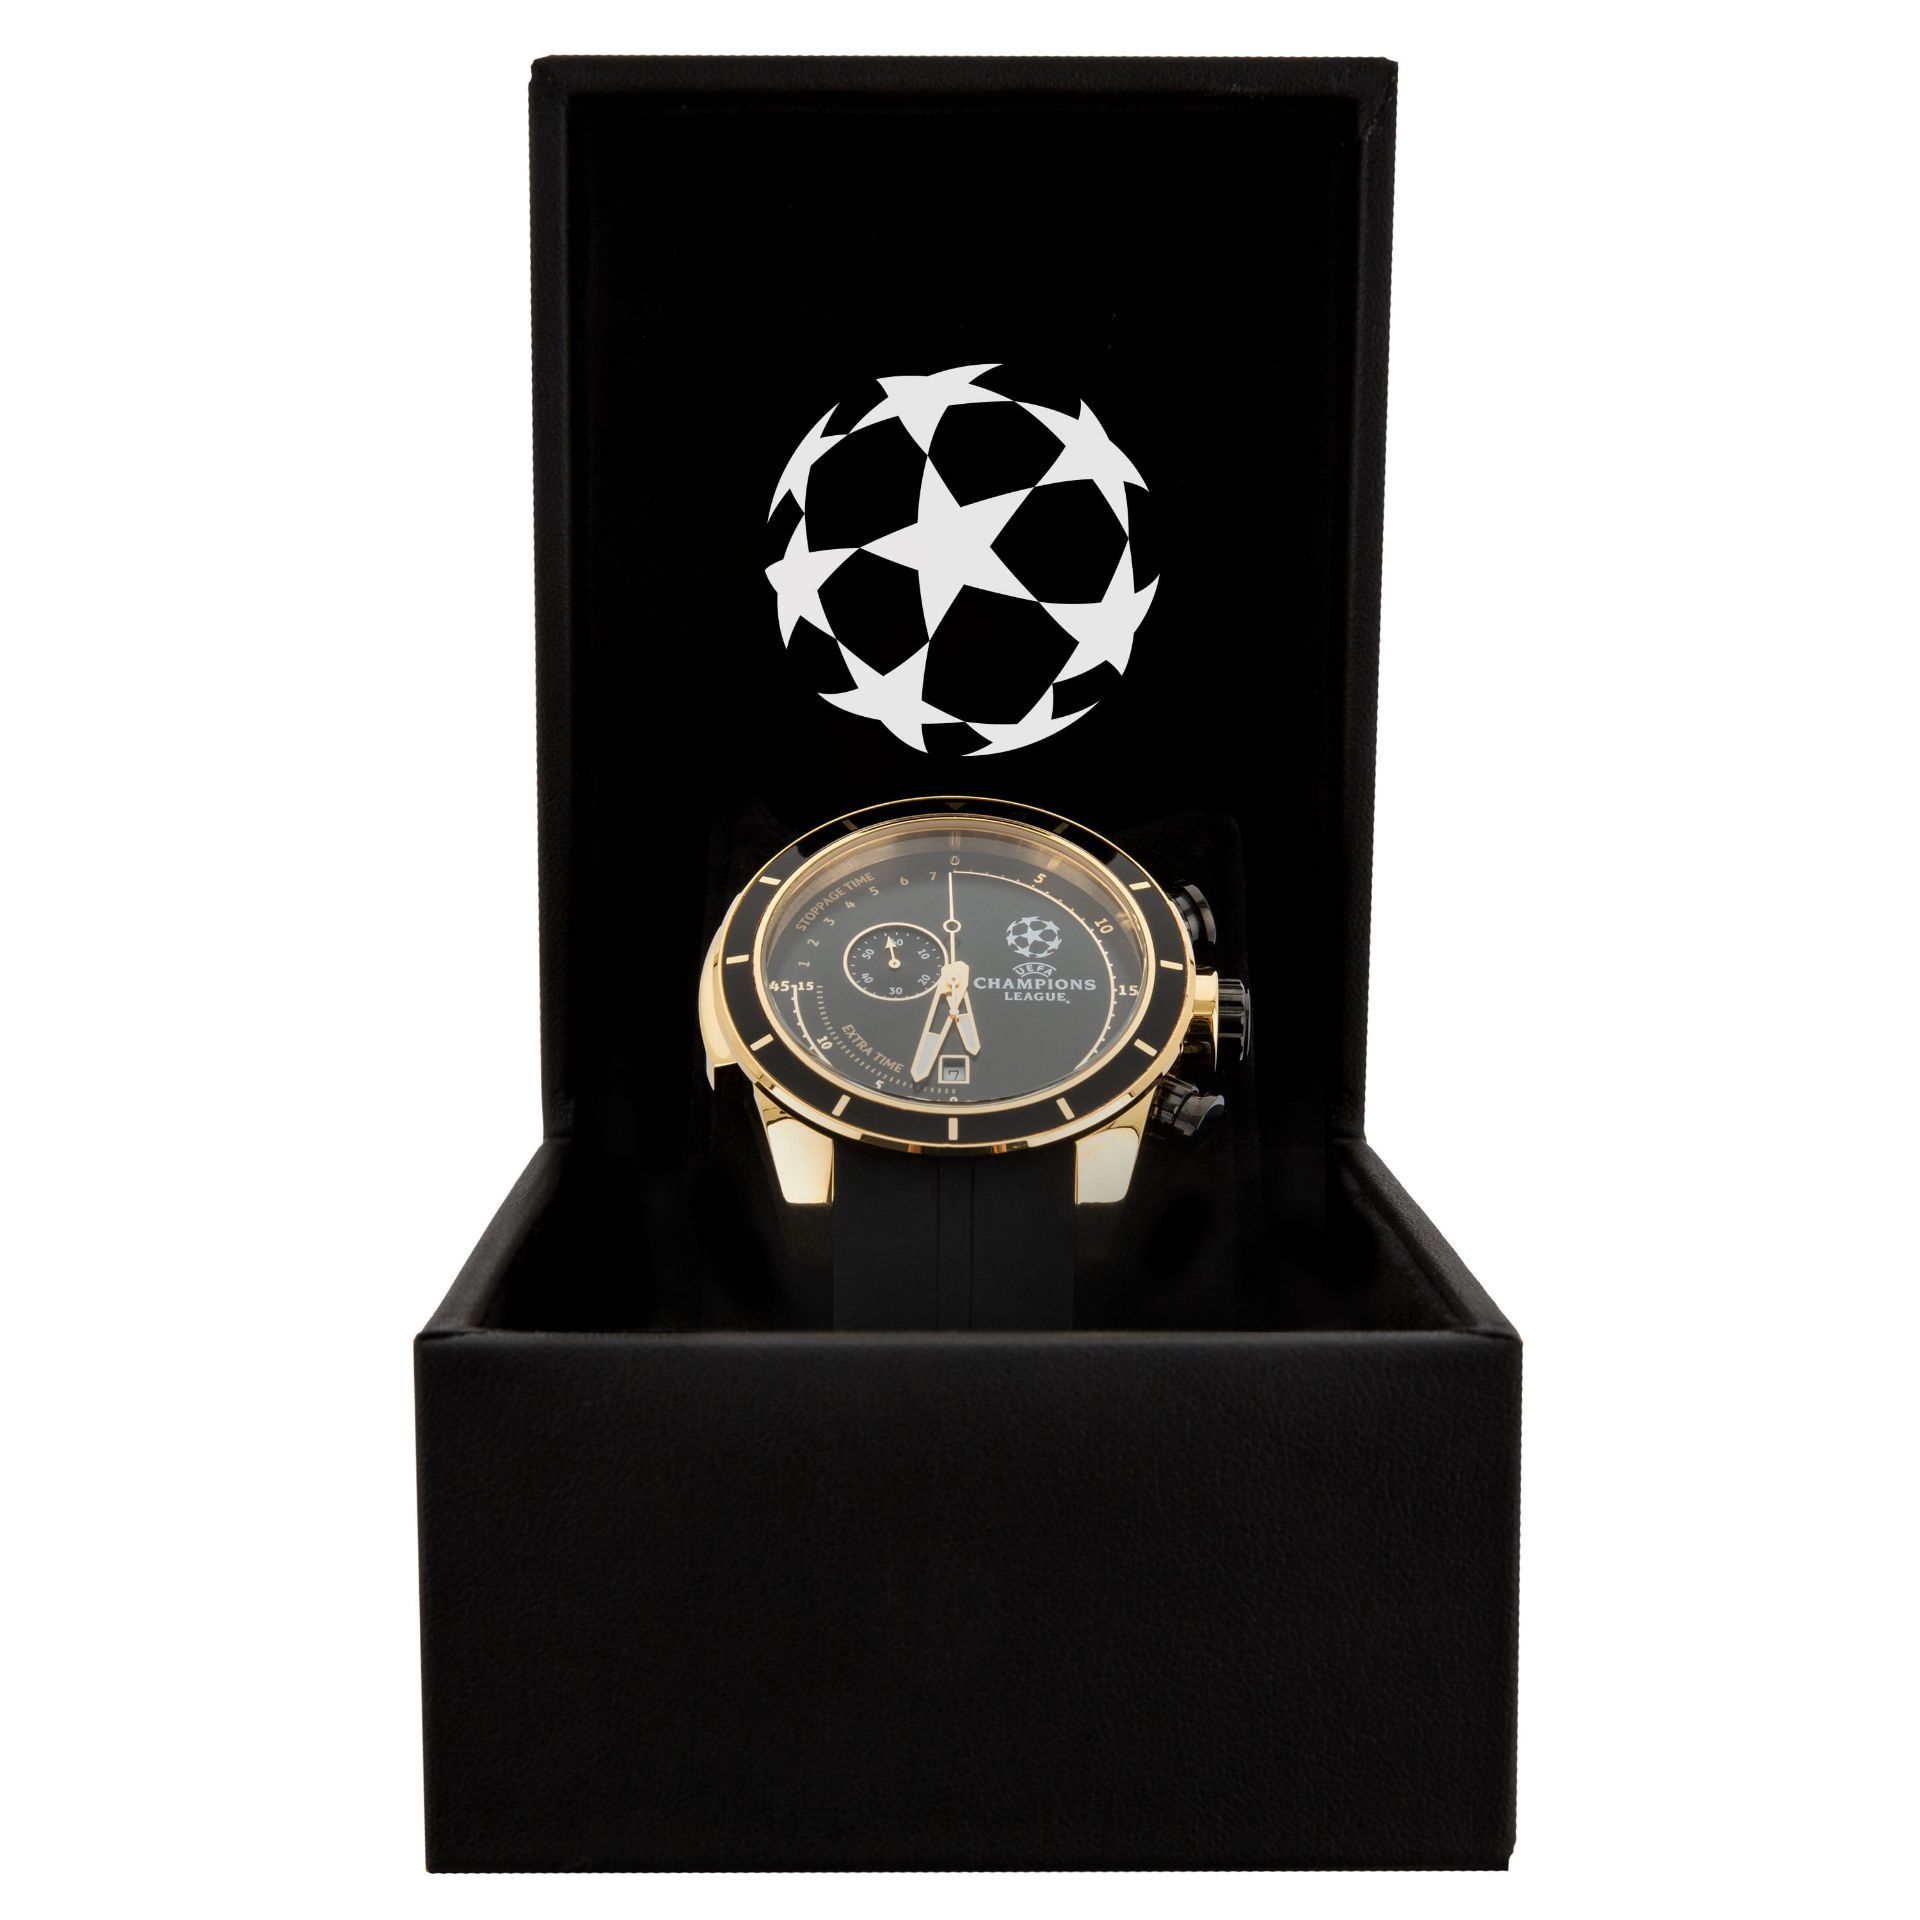 BRAND NEW OFFICIAL UEFA CHAMPIONS LEAGUE 45 MINUTE COUNTDOWN WATCH CL45-GLDW-BLWHP, RRP £225 - Image 4 of 5